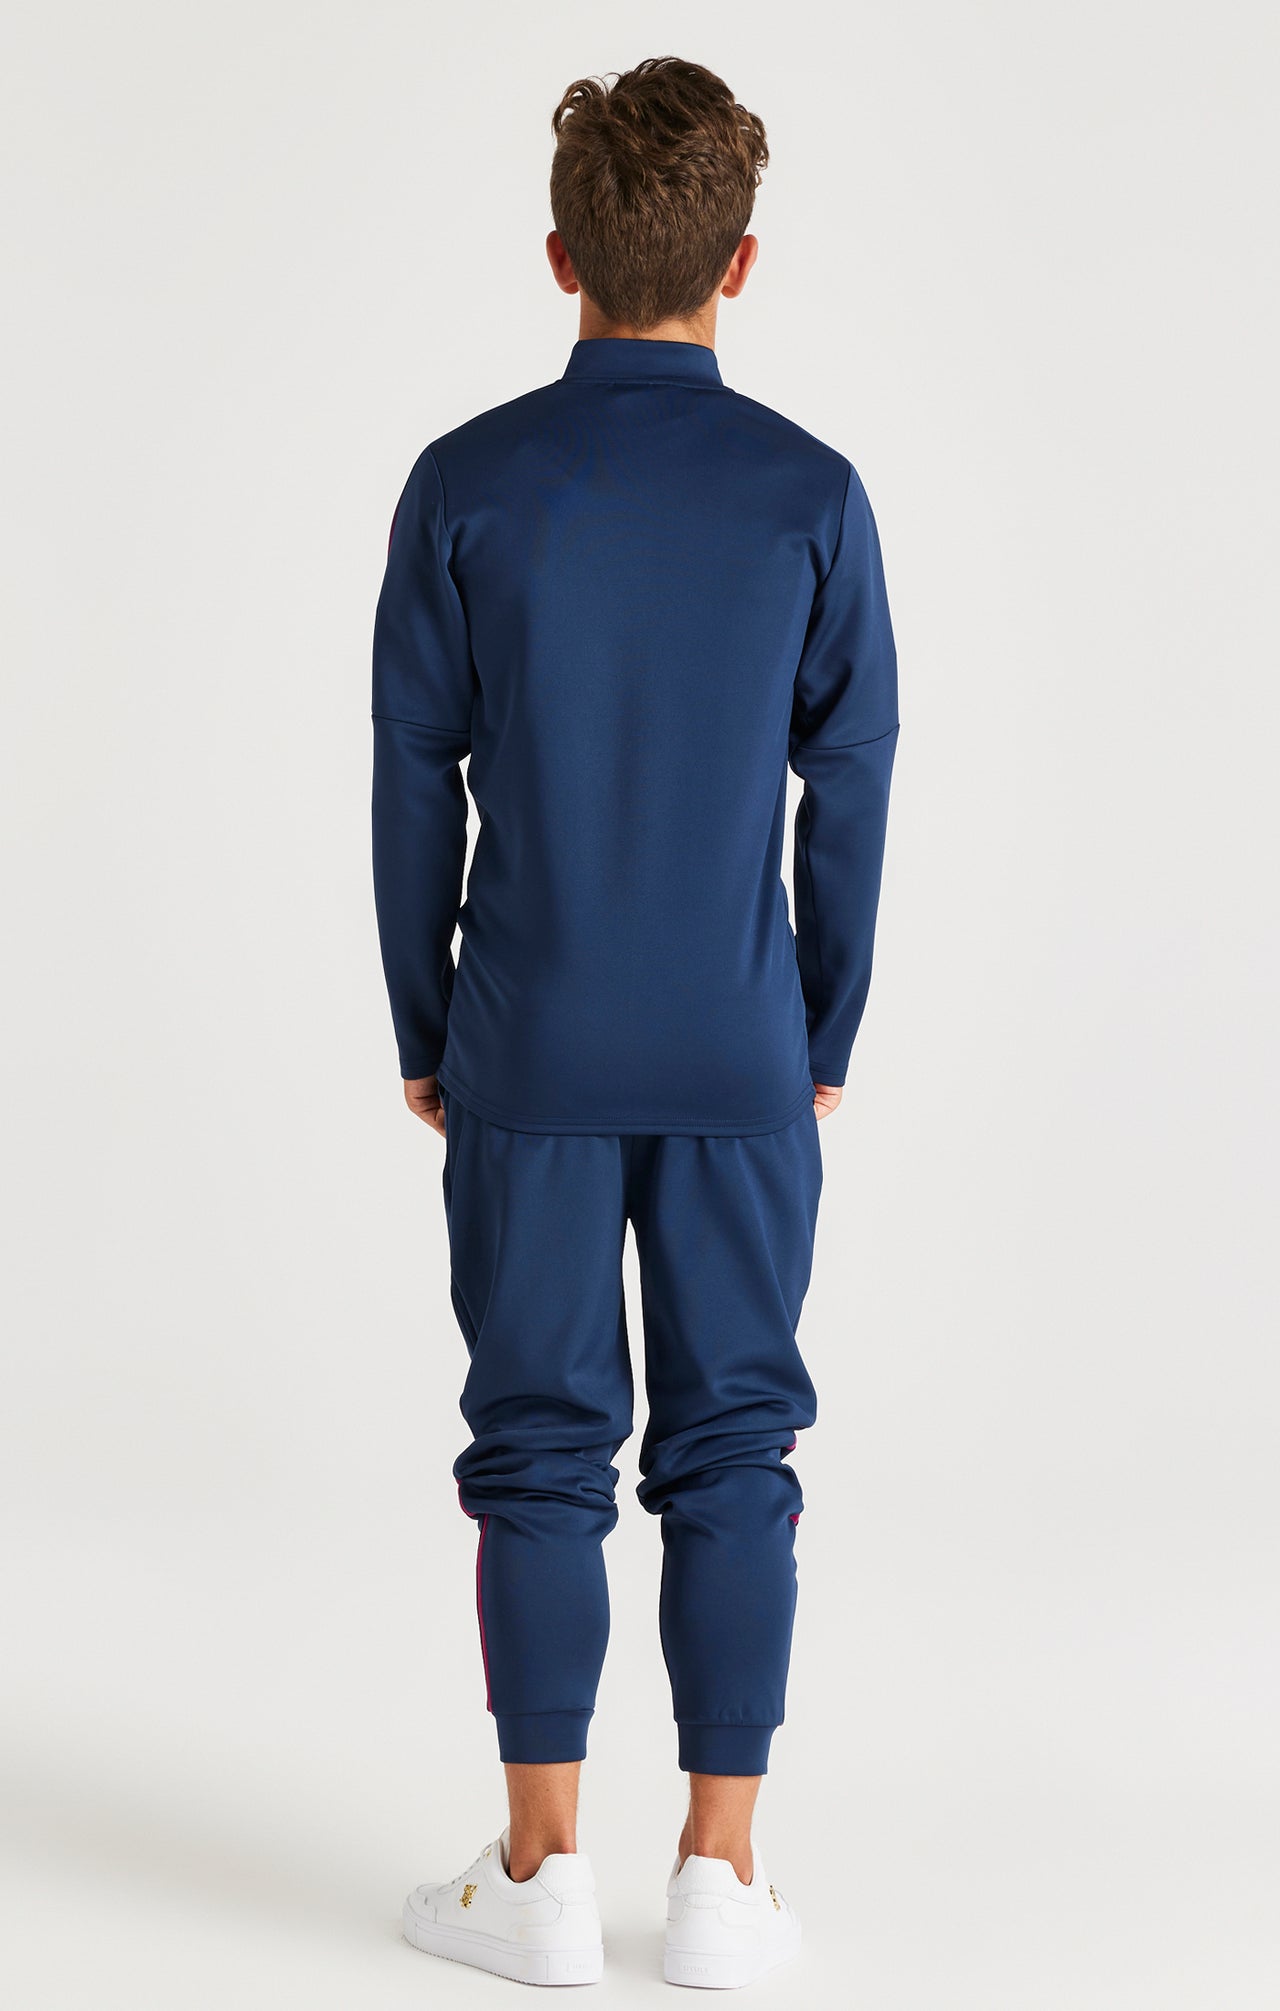 SikSilk Zonal Fade Track Top - Navy (4)